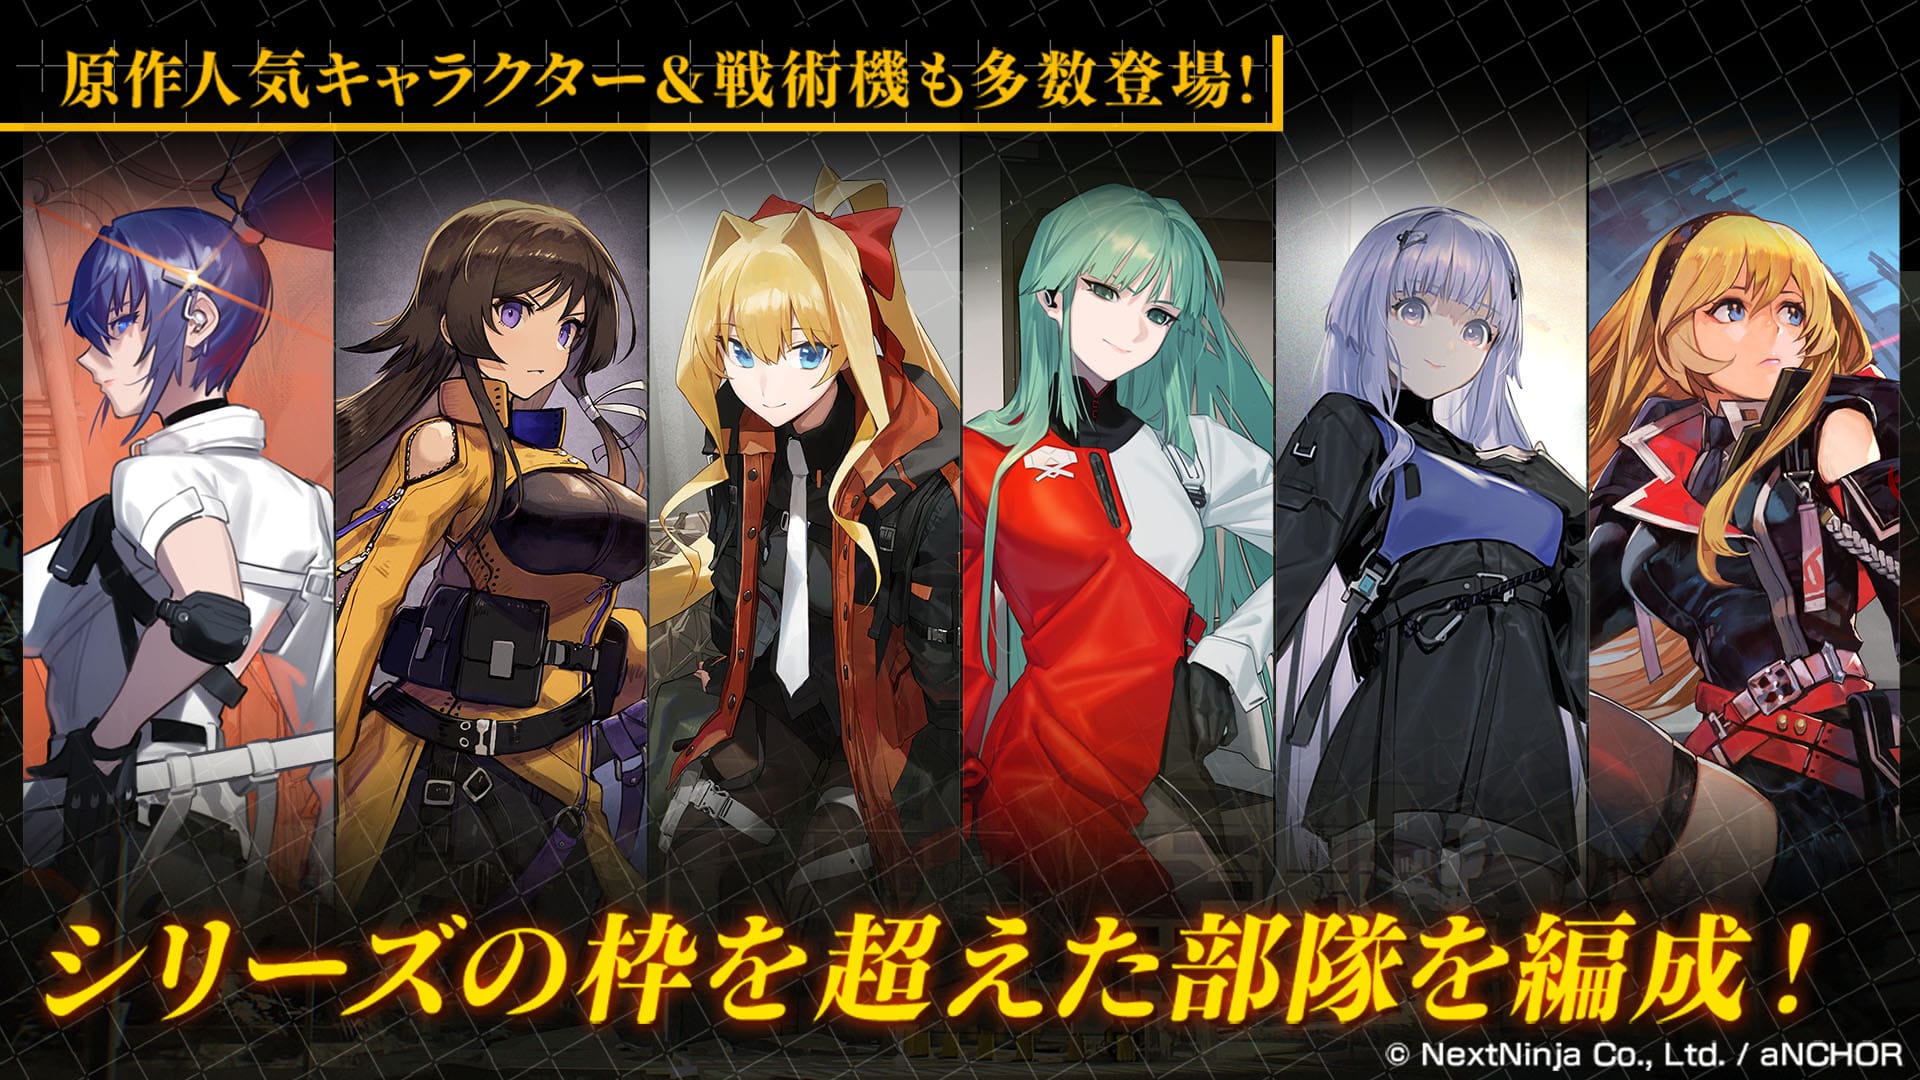 Muv-Luv Dimensions Characters